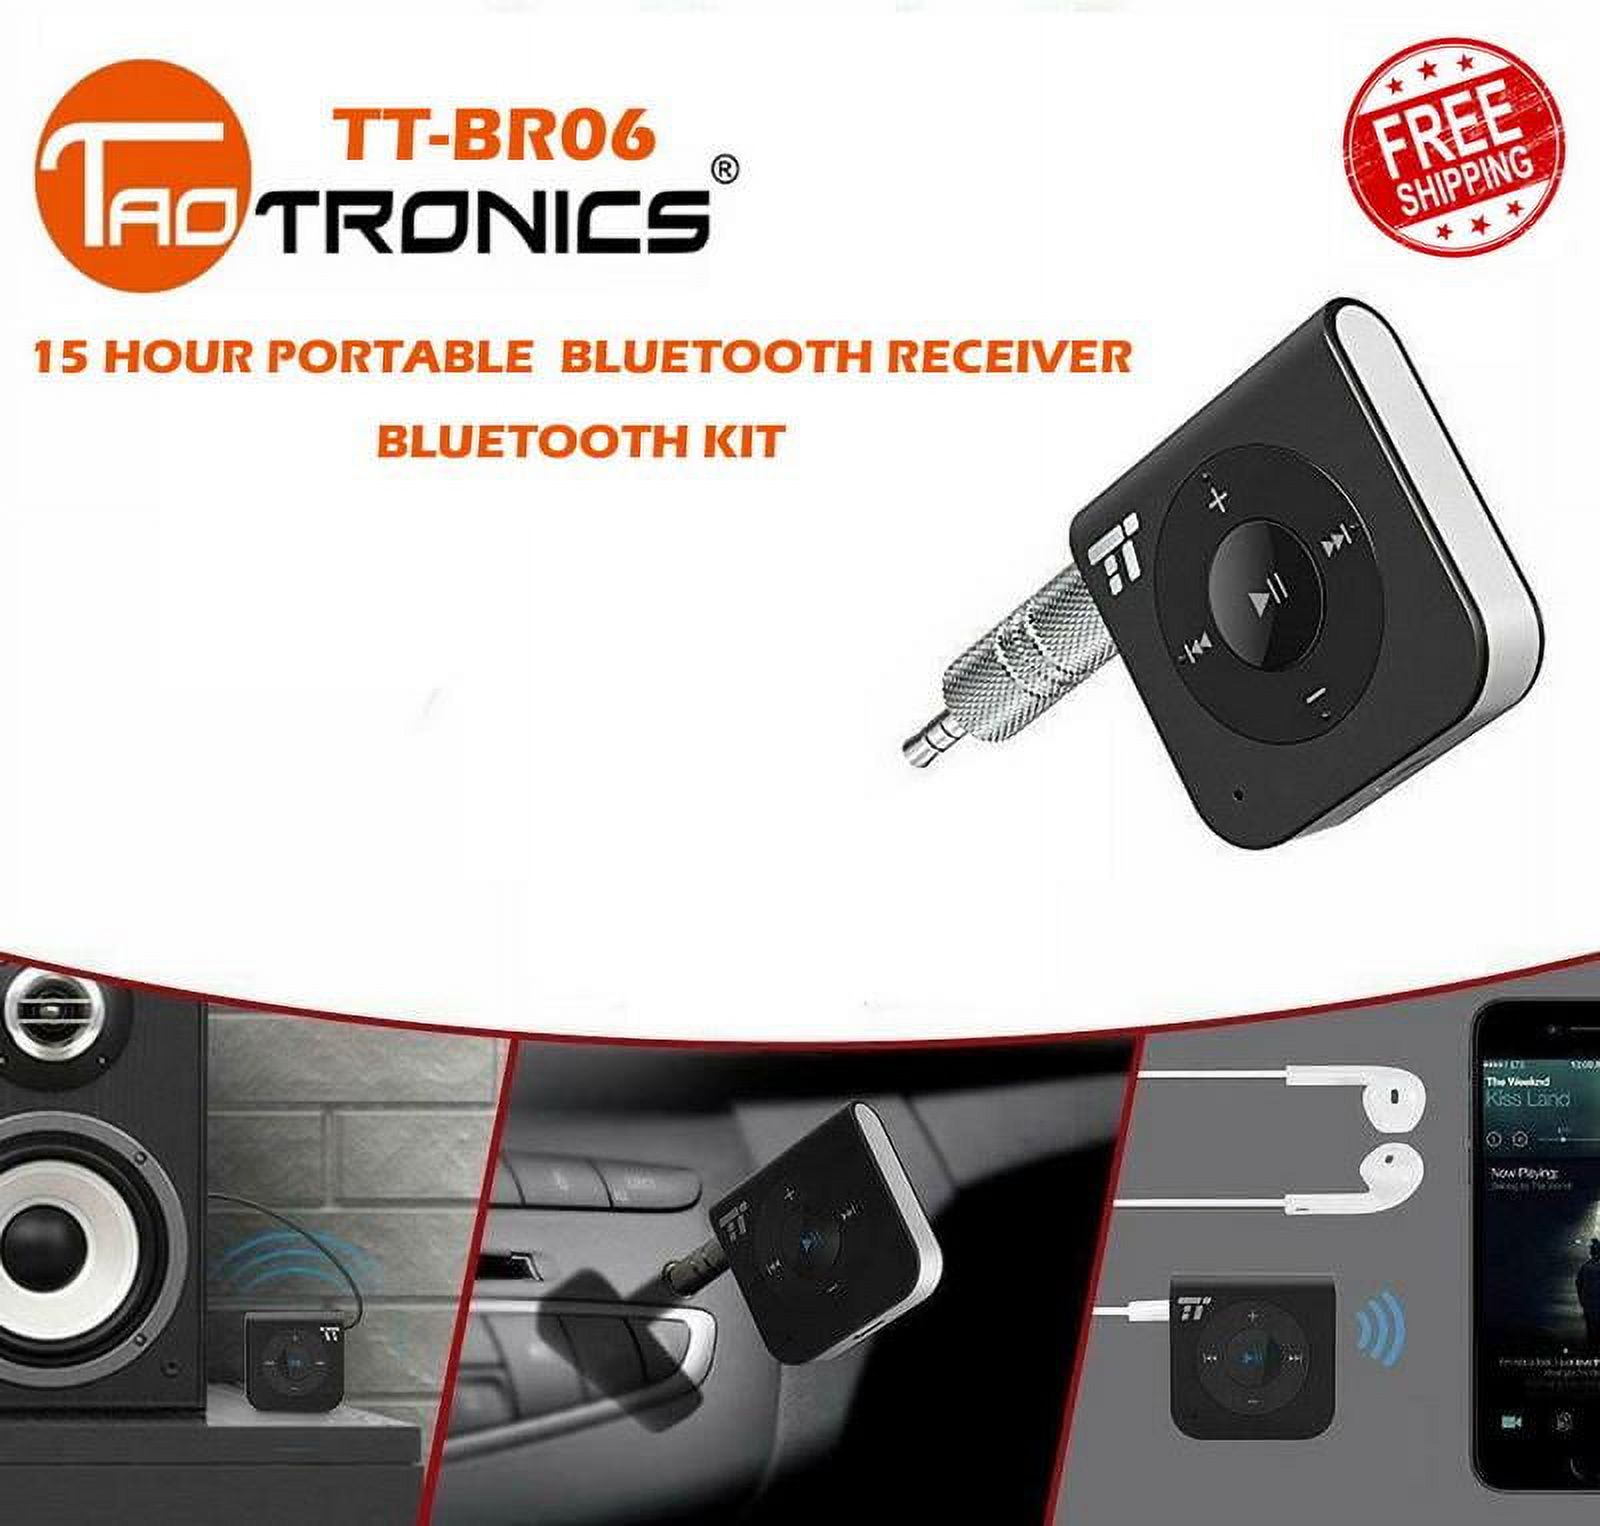 Taotronics Portable 15 Hour Bluetooth Receiver Wireless Car Aux Adapter SB23 - image 1 of 4